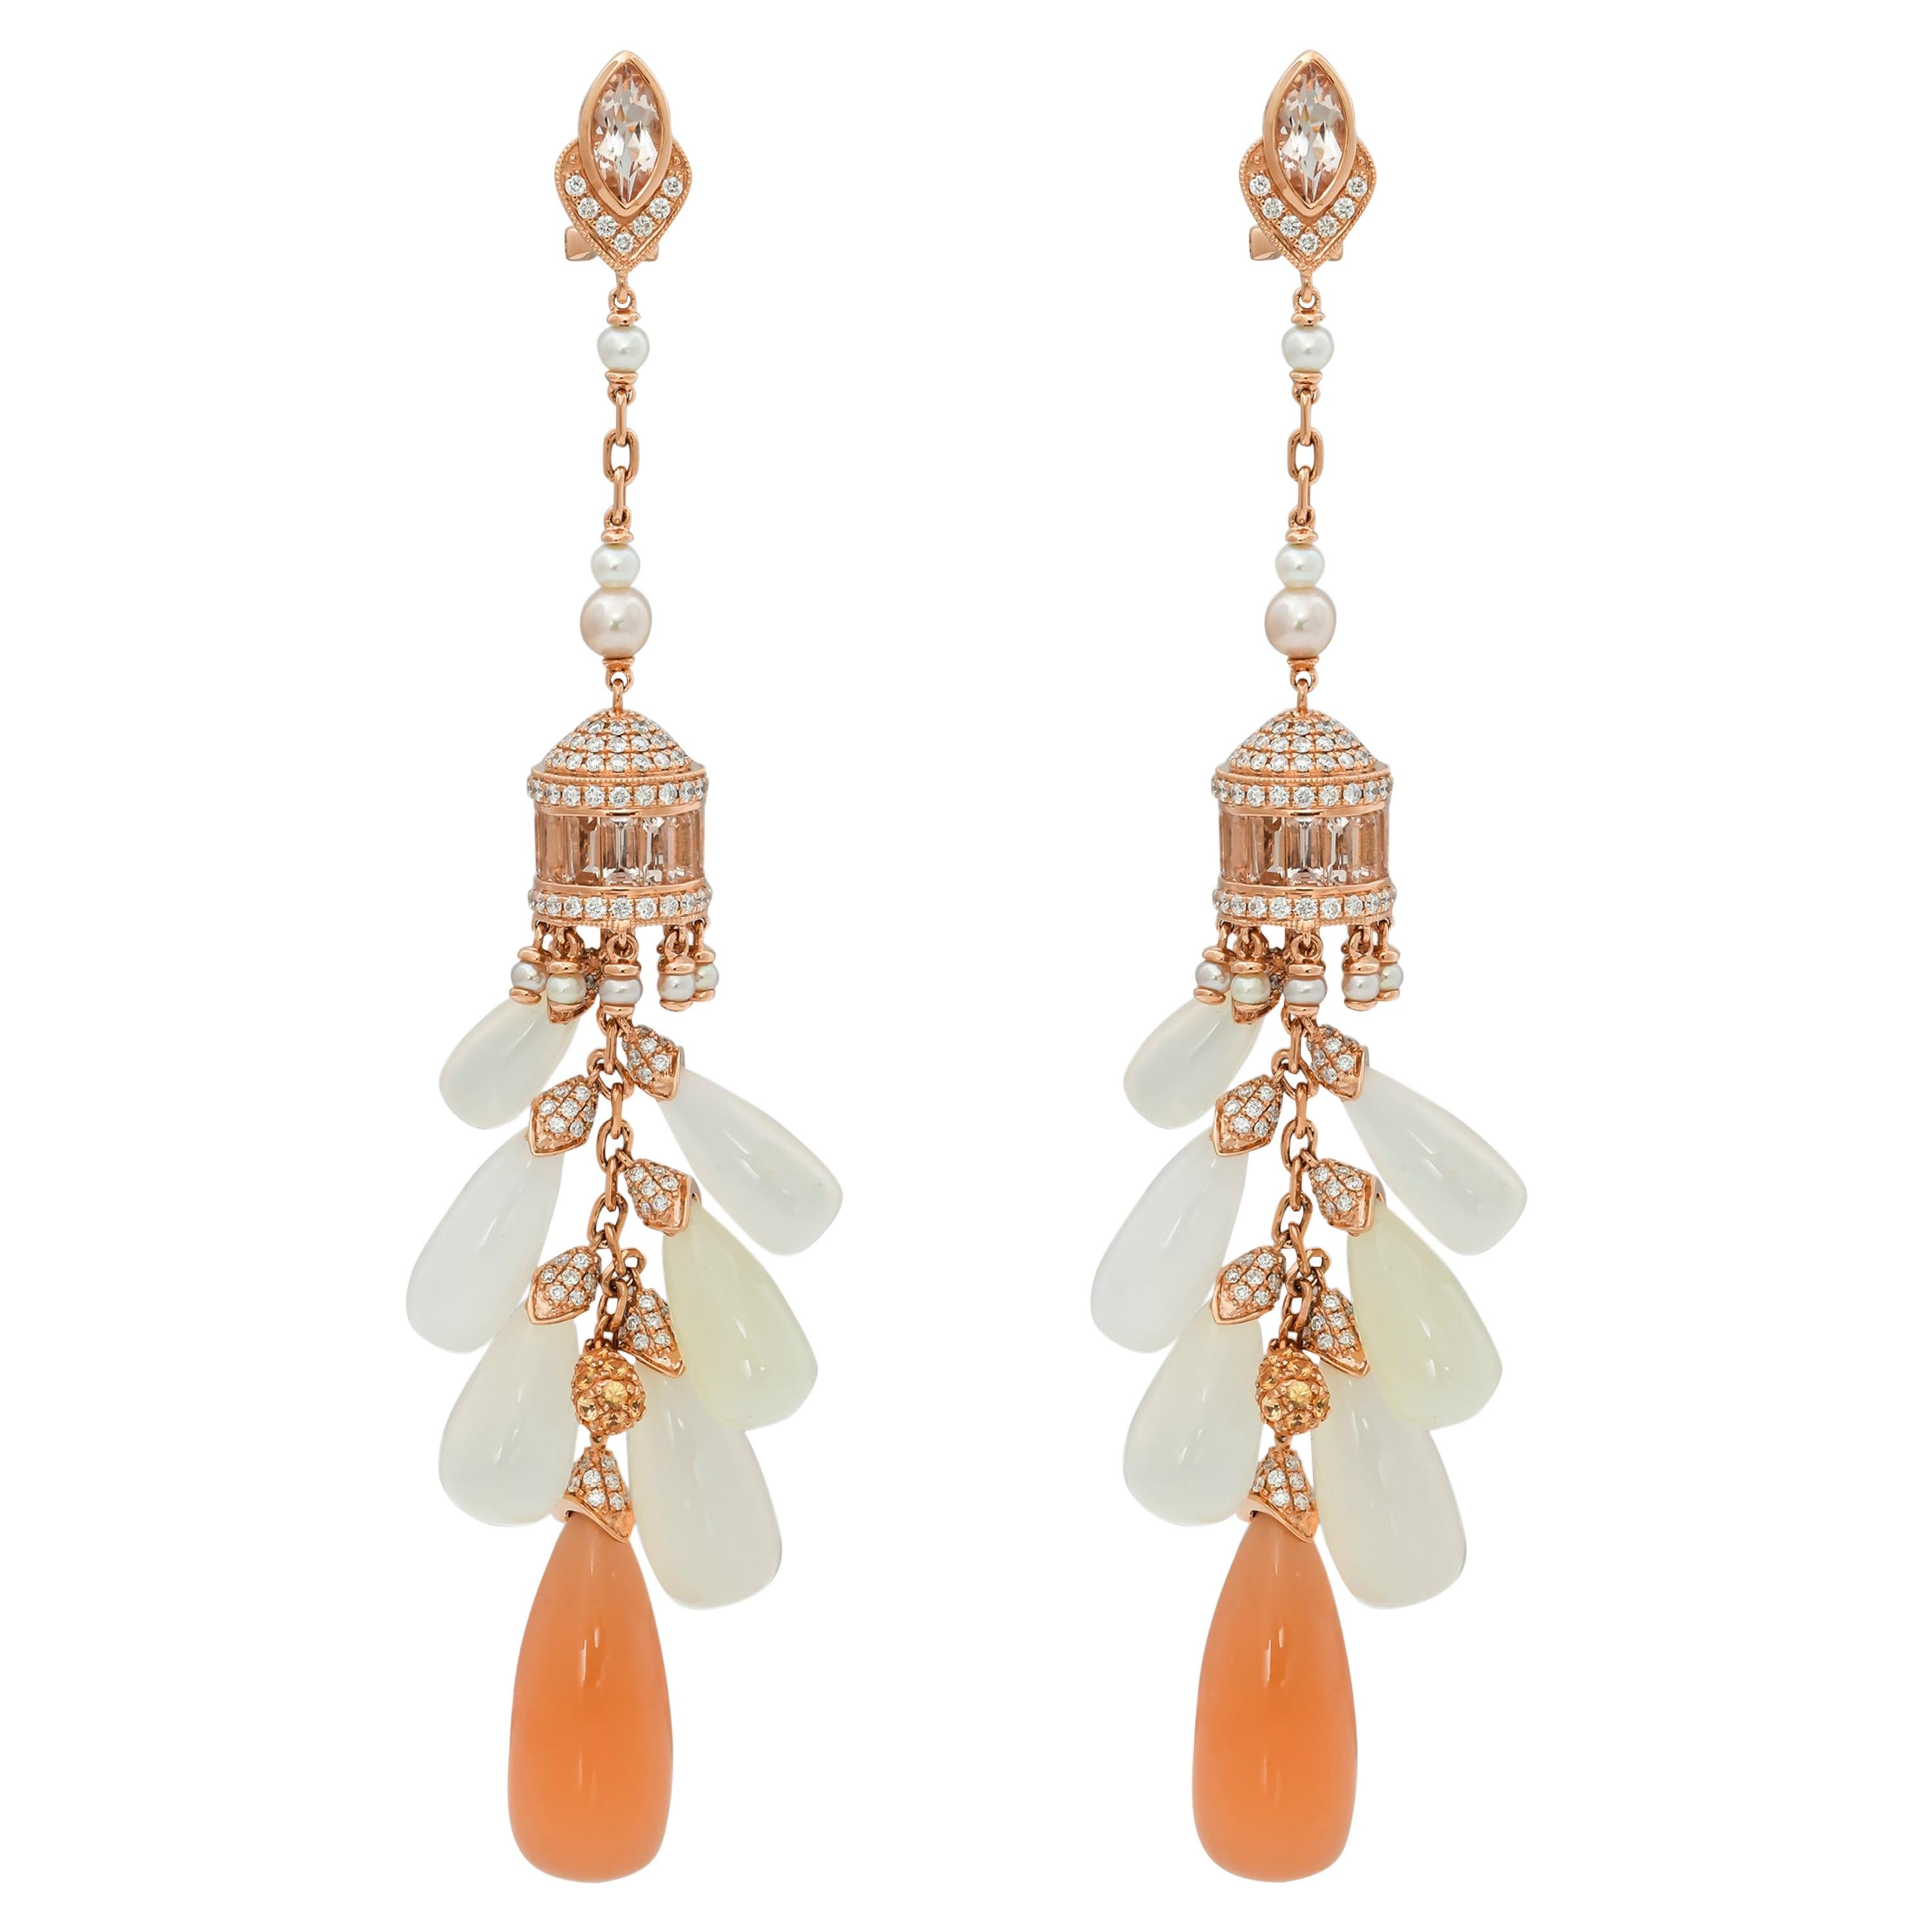 Moonstone Chandelier Earrings in 18 Karat Rose Gold with Diamonds and Color Gems